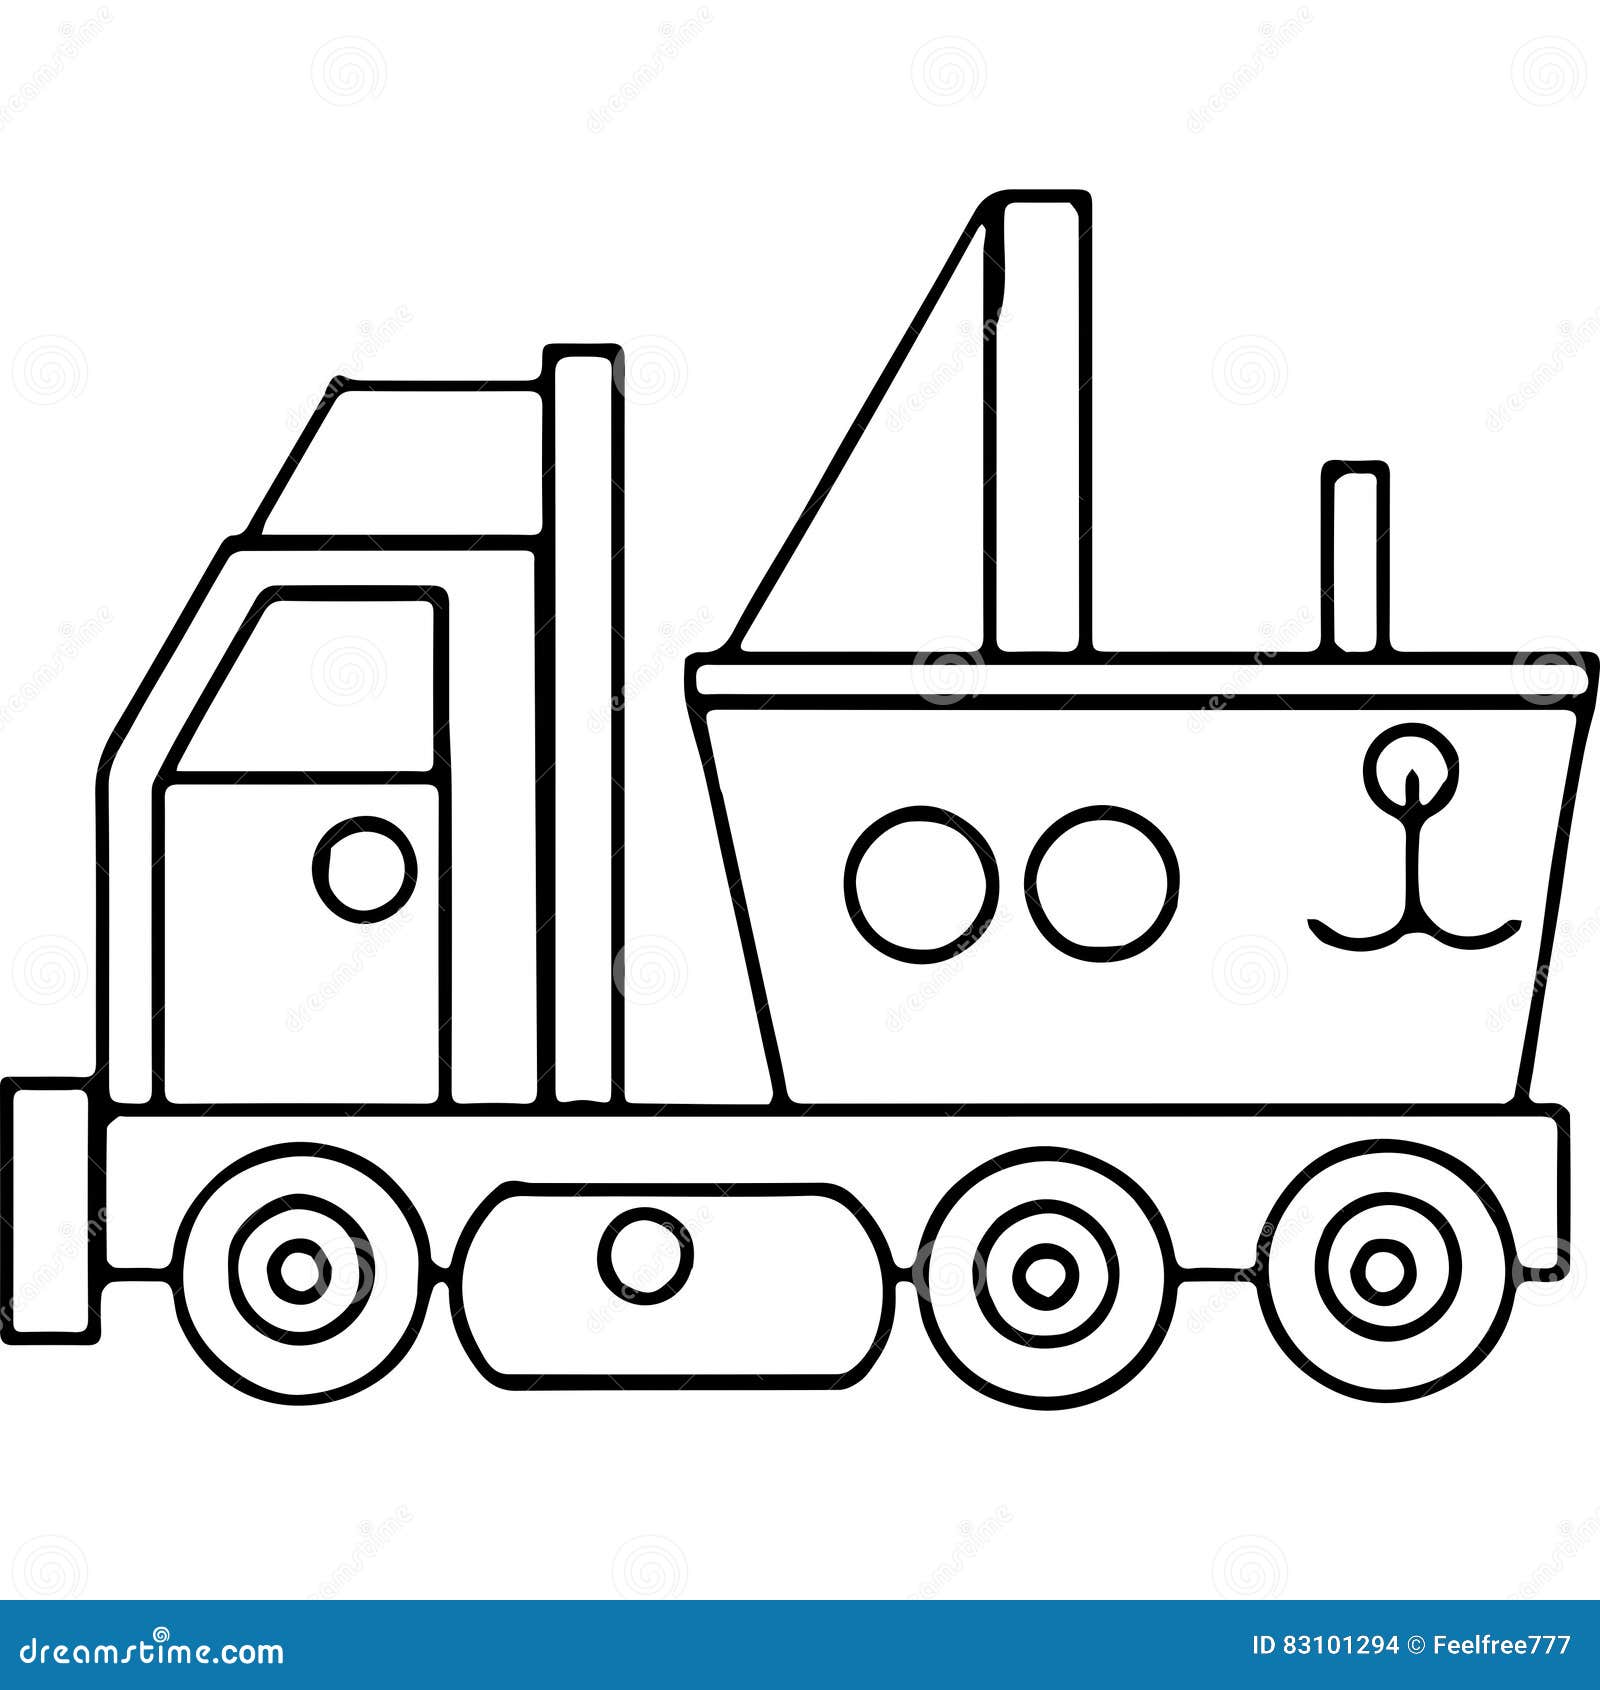 Truck Kids Geometrical Figures Coloring Page Stock Illustration Illustration Of Family Candles 83101294